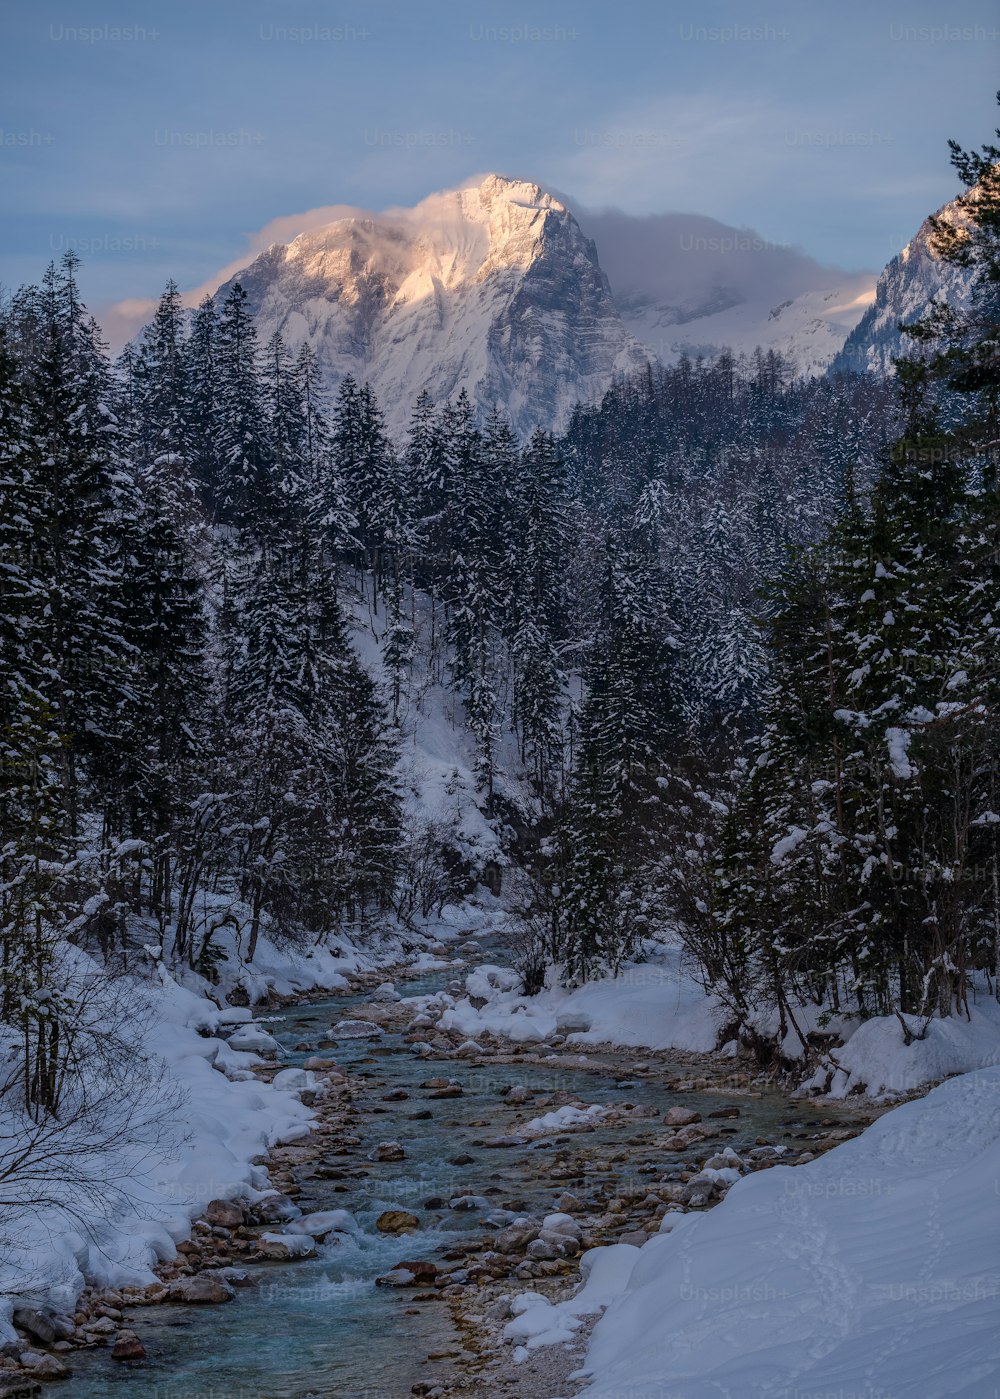 a snowy mountain with trees and a river